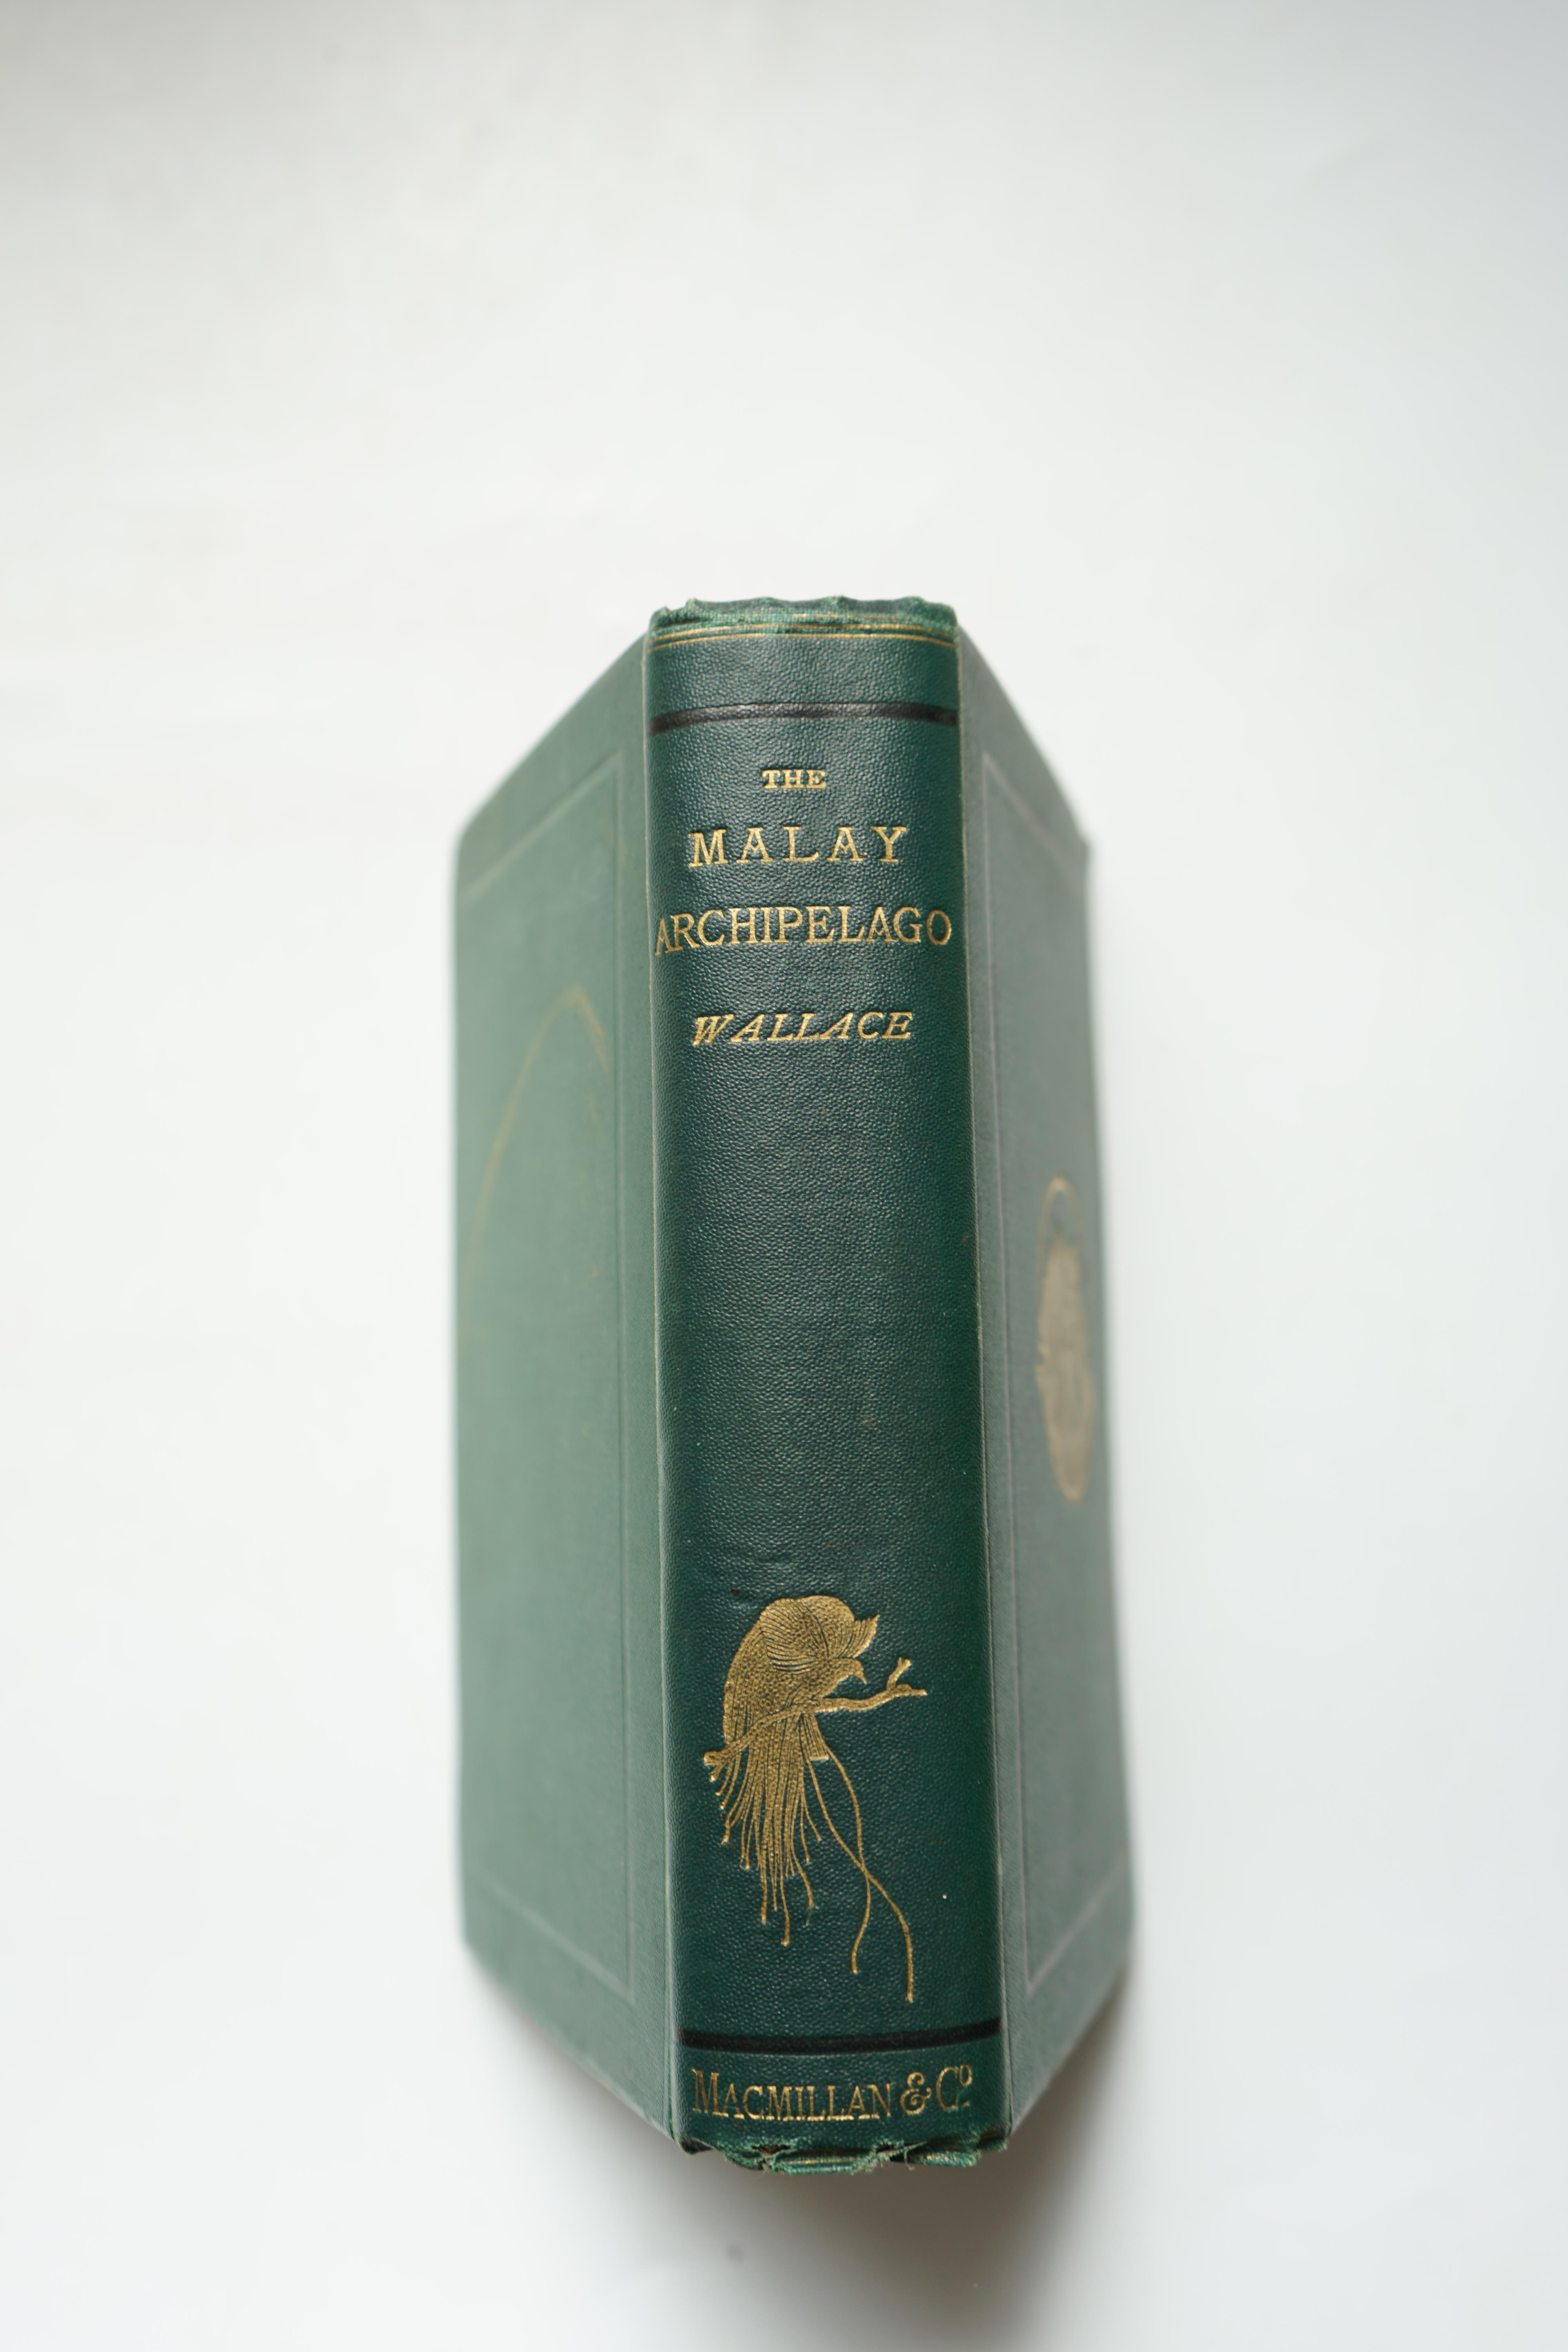 Wallace, Alfred Russel - The Malay Archipelago: The Land of the Orang-utan and the Bird of Paradise. A Narrative of Travel, with Studies of Man and Nature, engraved plates within text, engraved title page, frontispiece,